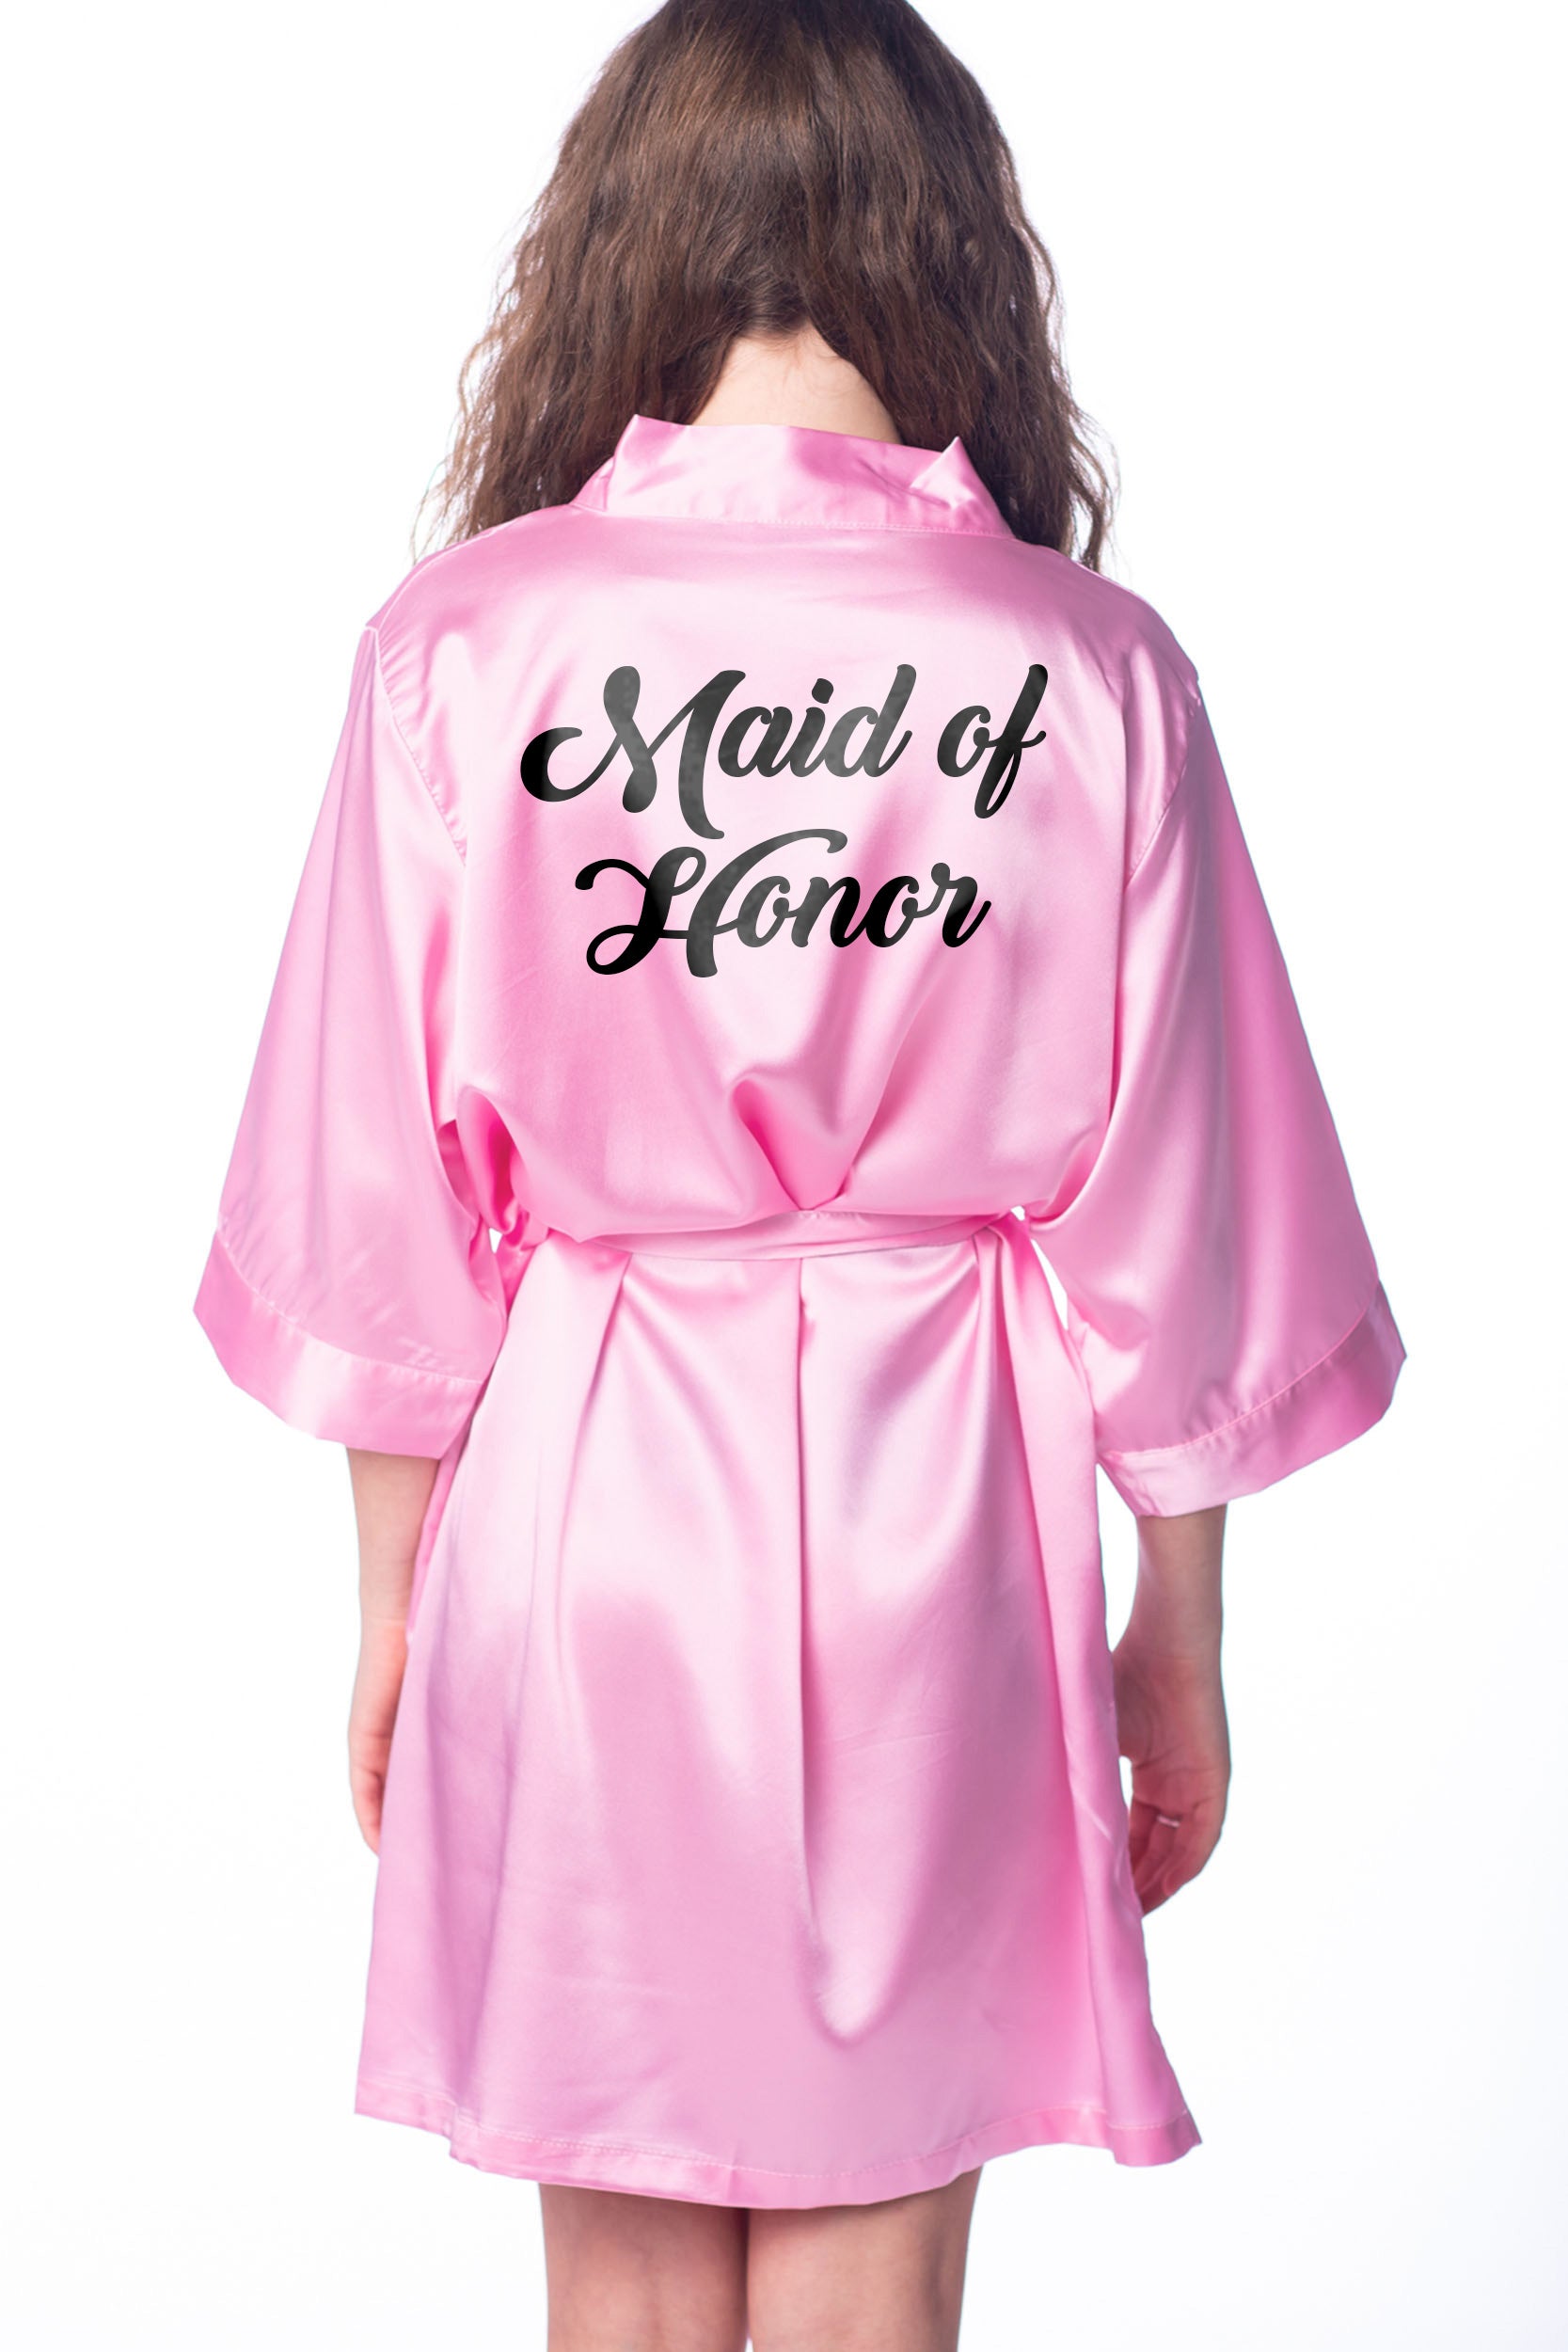 L/XL "Maid of Honor" Pink Satin Robe - Back to Black in Black (Clearance Item)